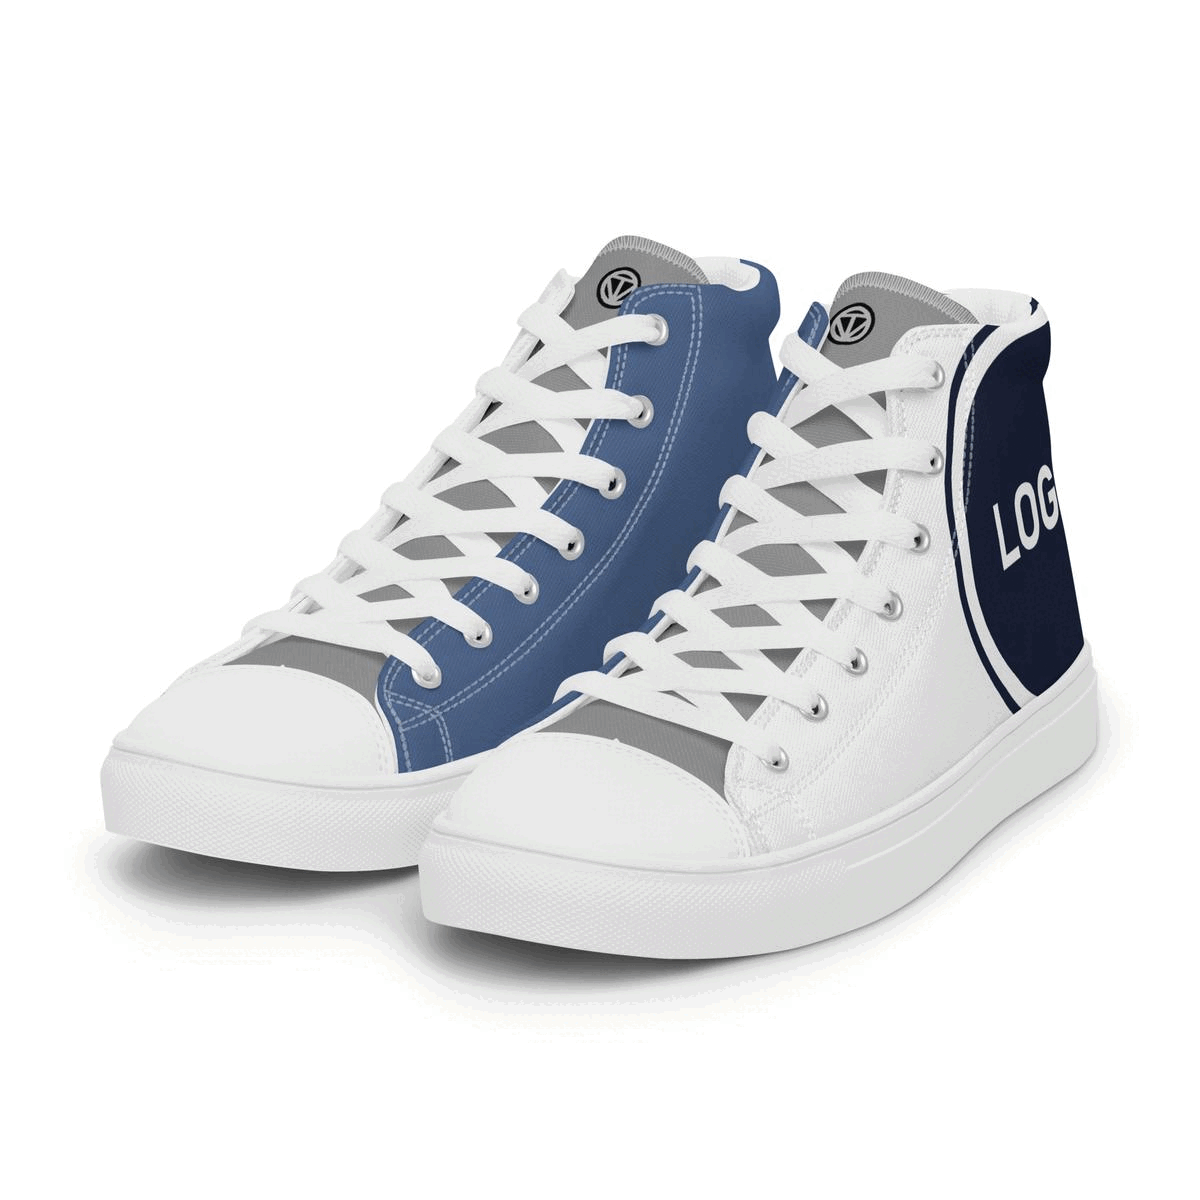 TIME OF VIBES - Men’s High Sneaker CORPORATE - €129.00